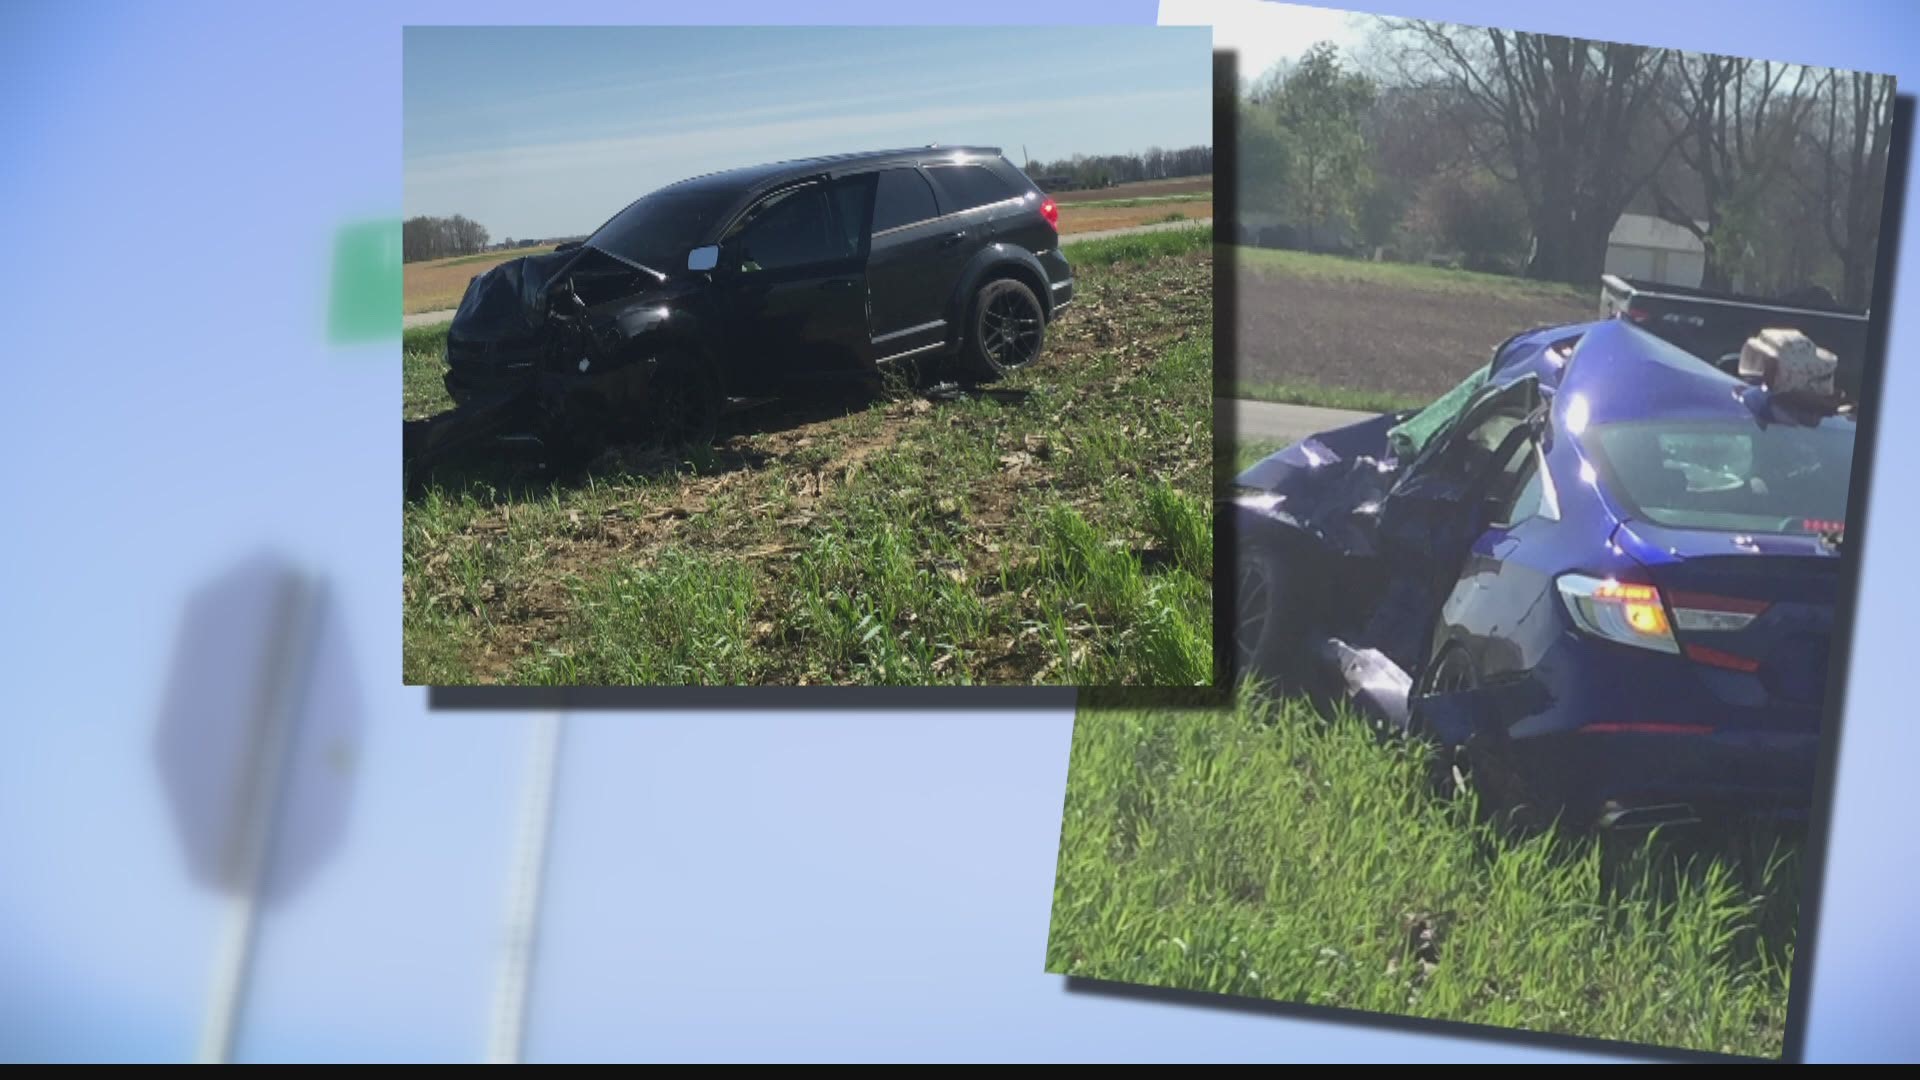 Two high school students were killed in a crash in Hamilton County Saturday night as they were driving to a school prom.